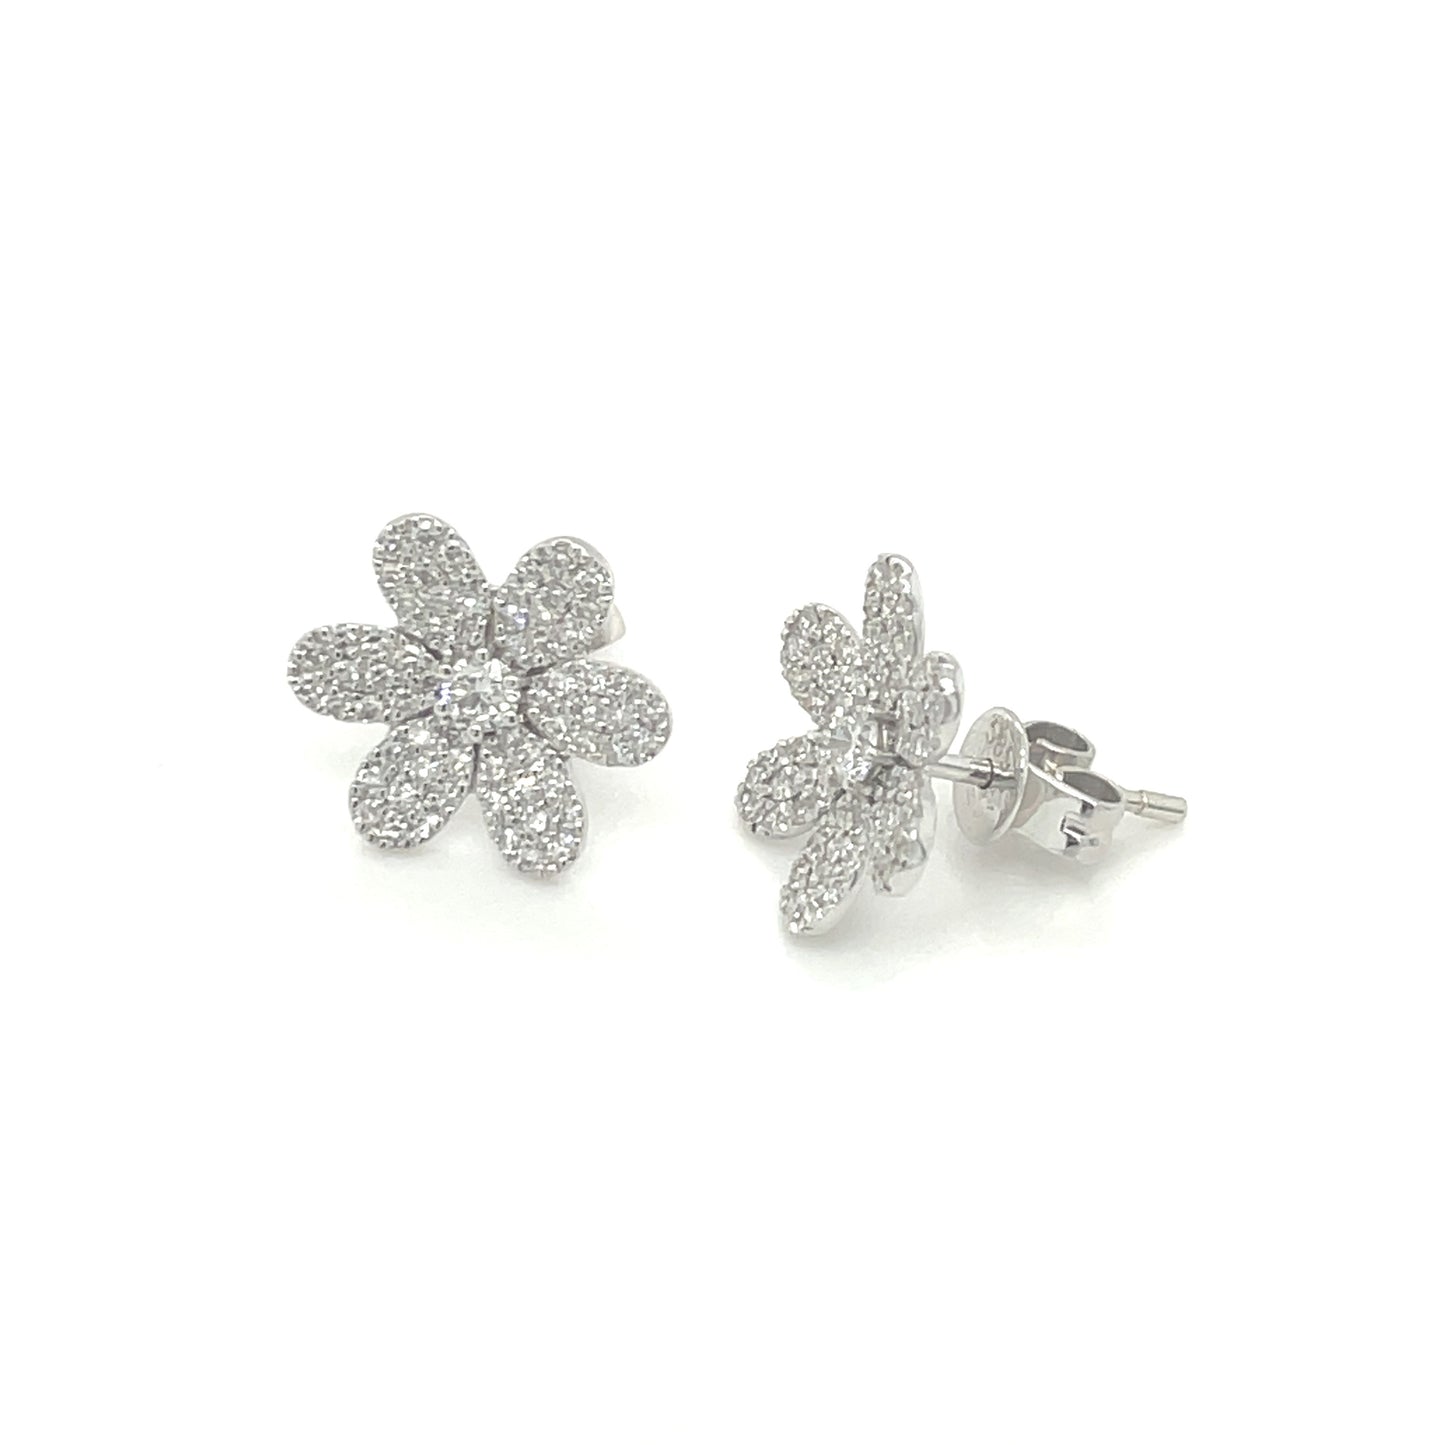 WHITE GOLD AND PAVE SET DIAMOND FLOWER EARRINGS